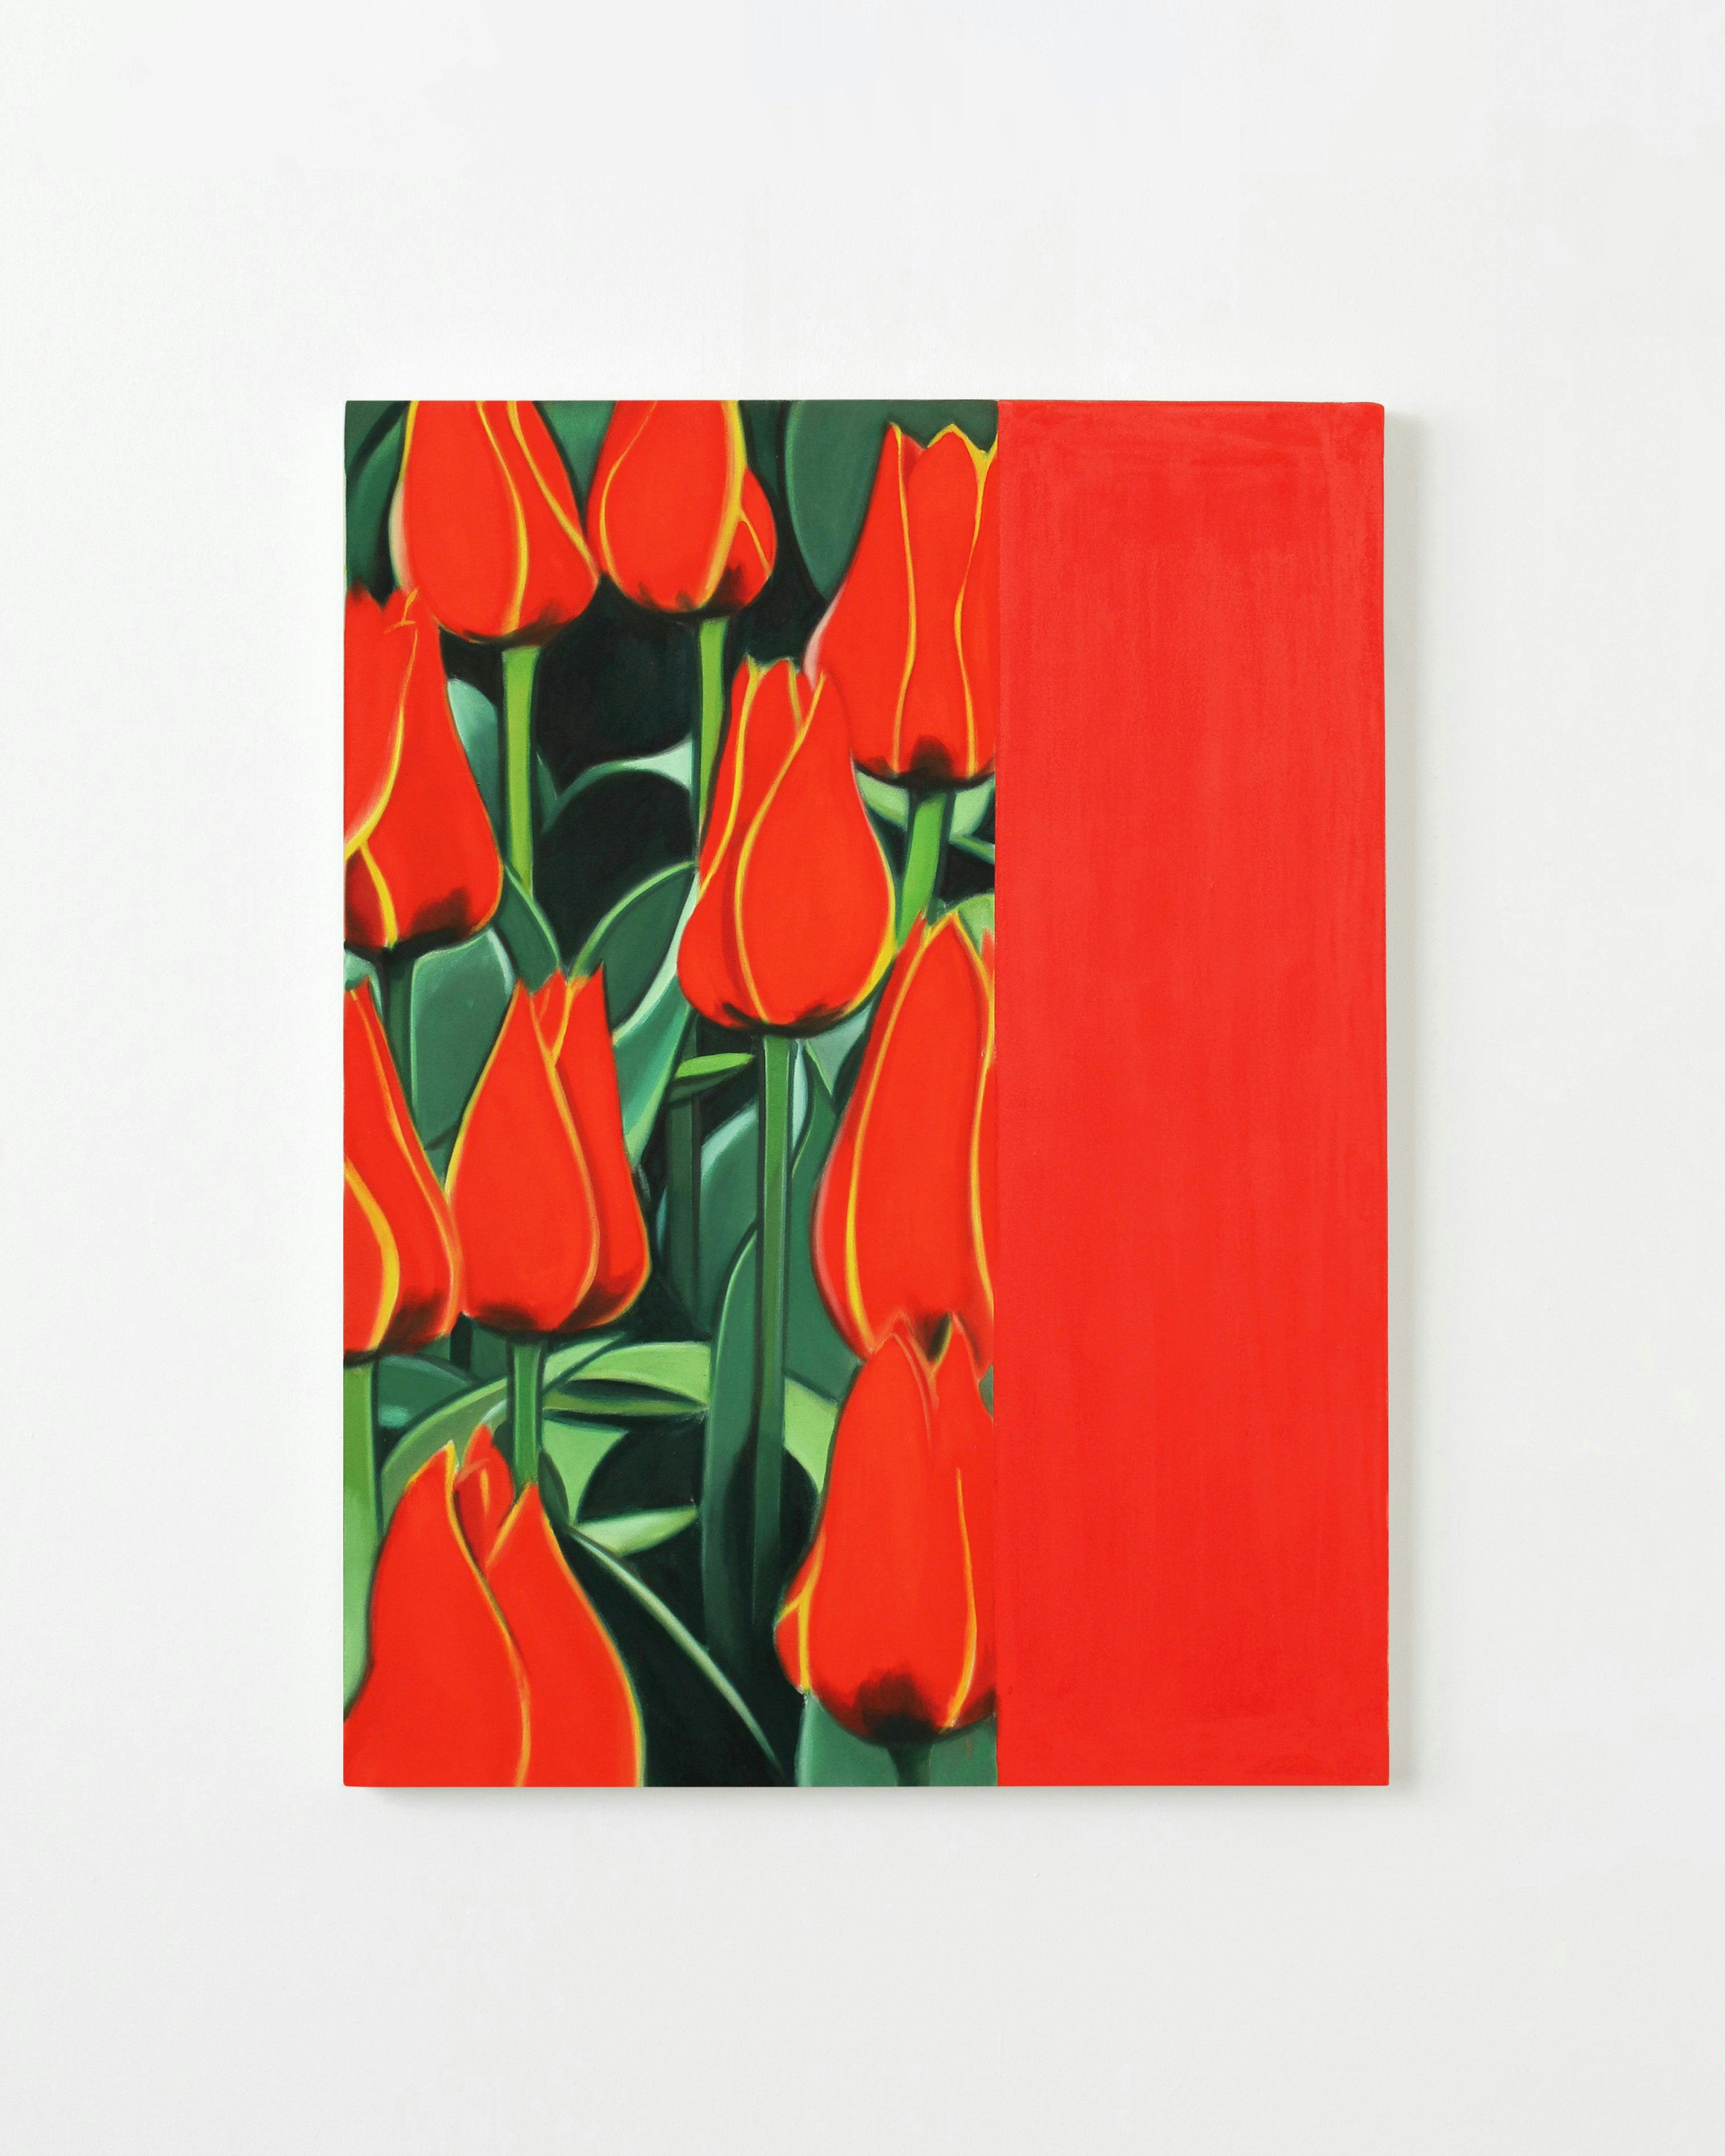 Painting by Bryce Anderson titled "Tulip".